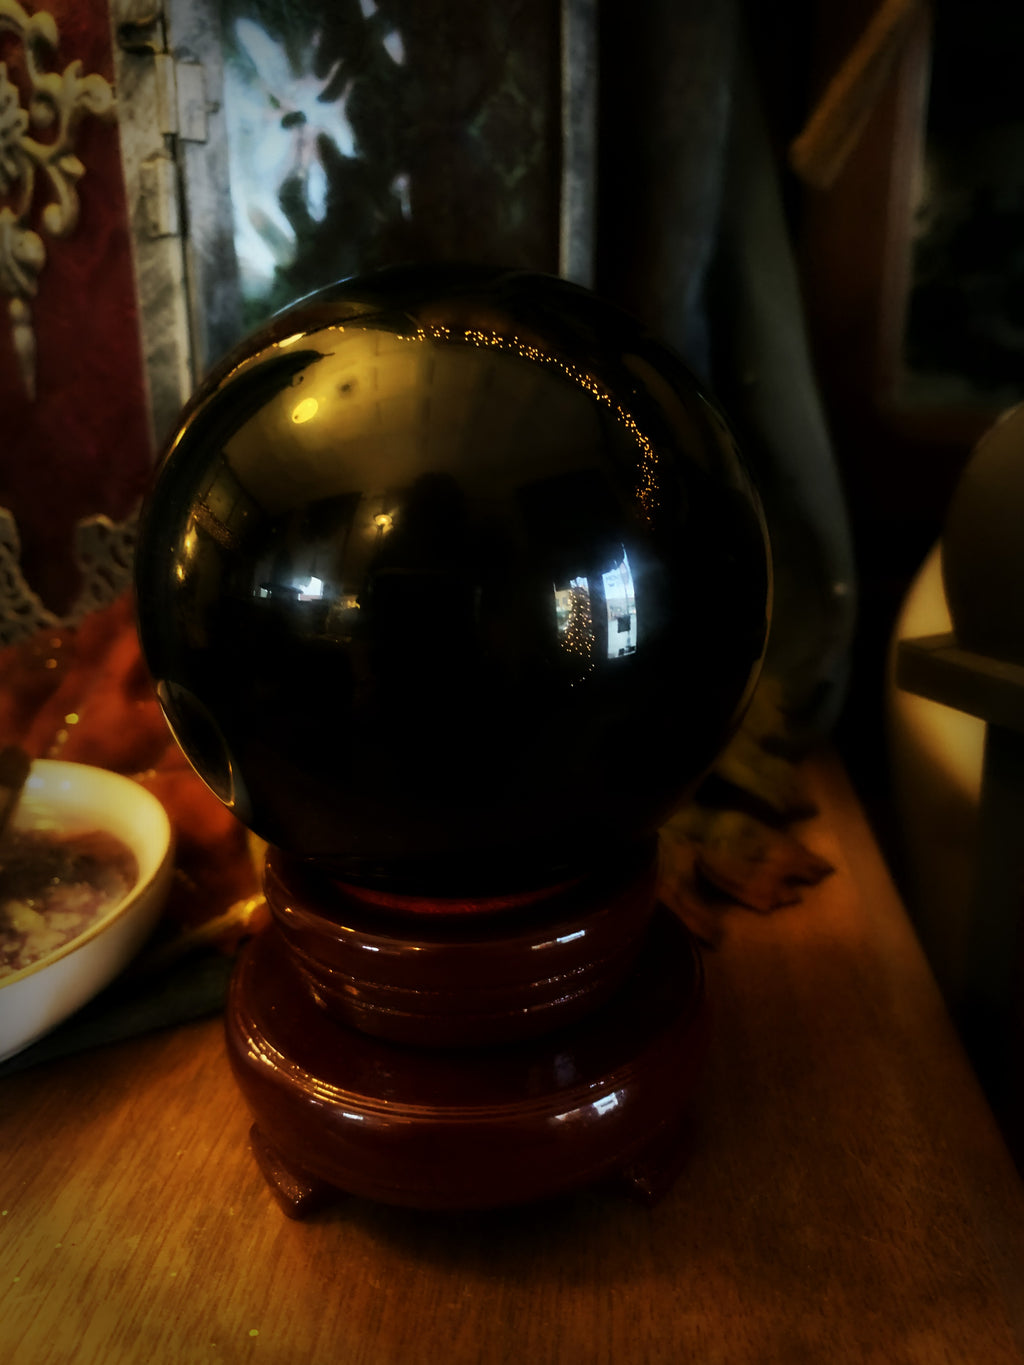 OBSIDIAN GLASS GAZING GLOBE ~ For Scrying and Spirit Connection